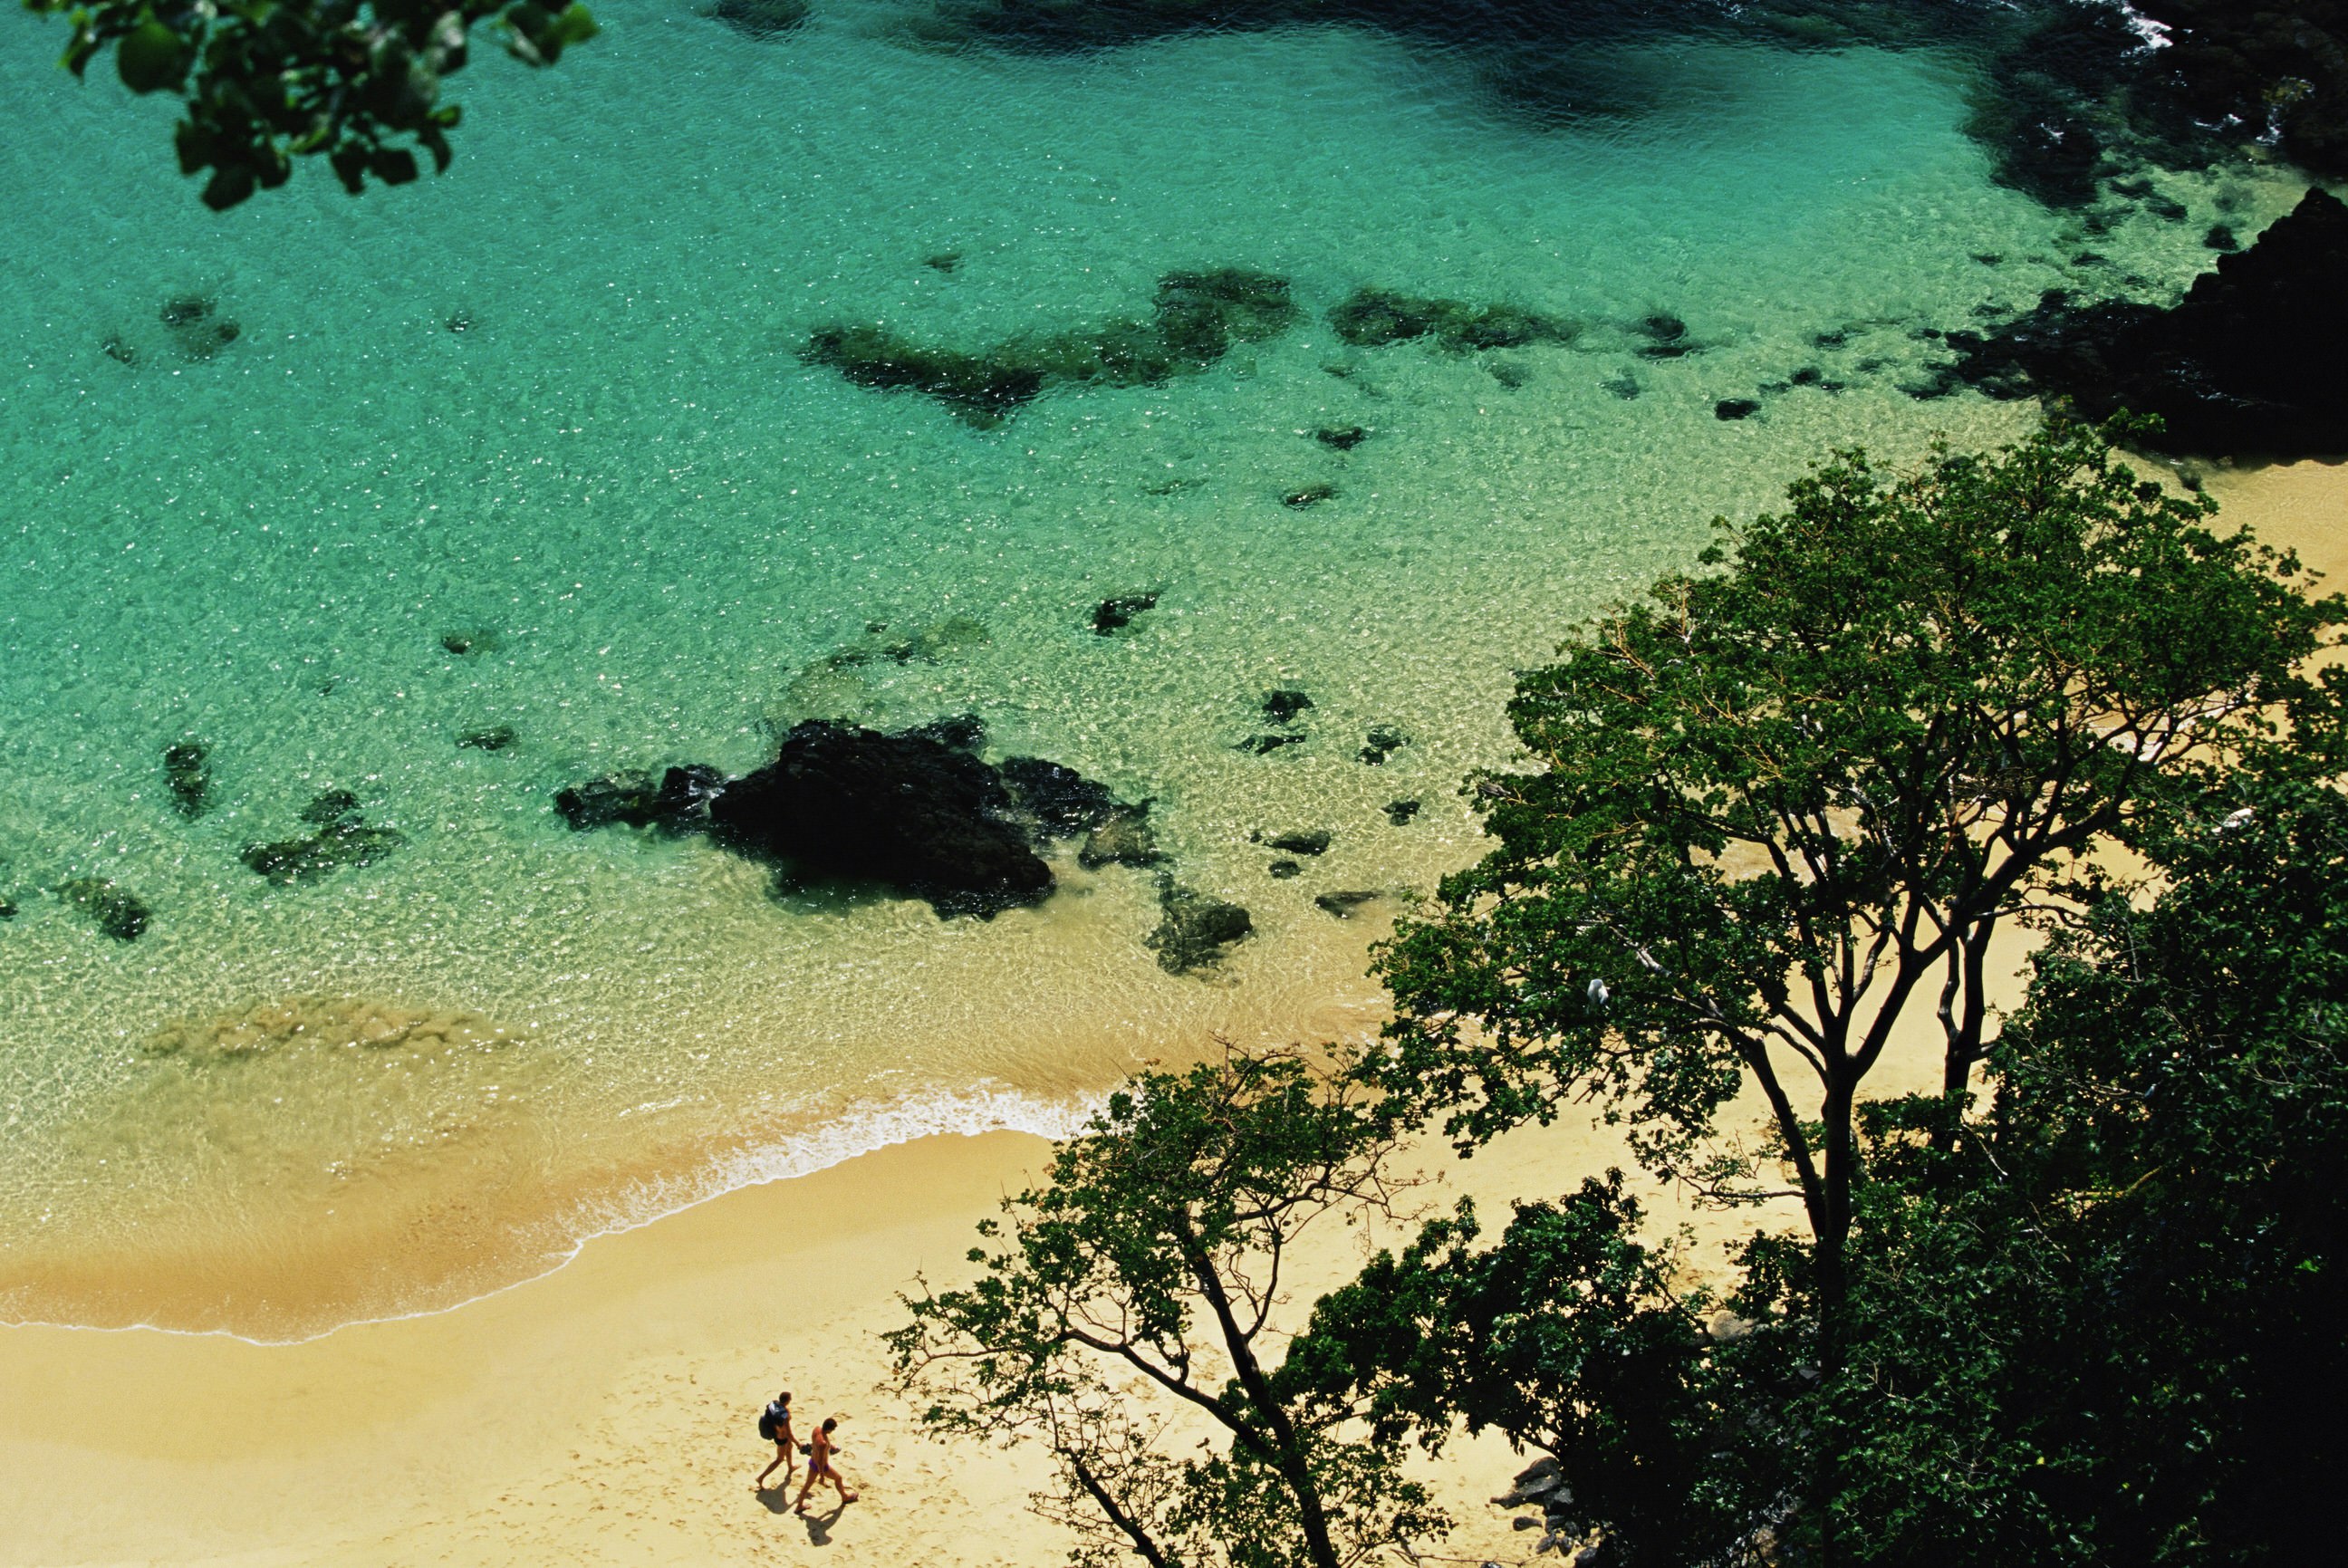 View looking down onto a beach, which is partially obscured by lush green trees. Two people can be seen walking together along the golden sands, as crystal clear, turquoise  waters lap the shore.